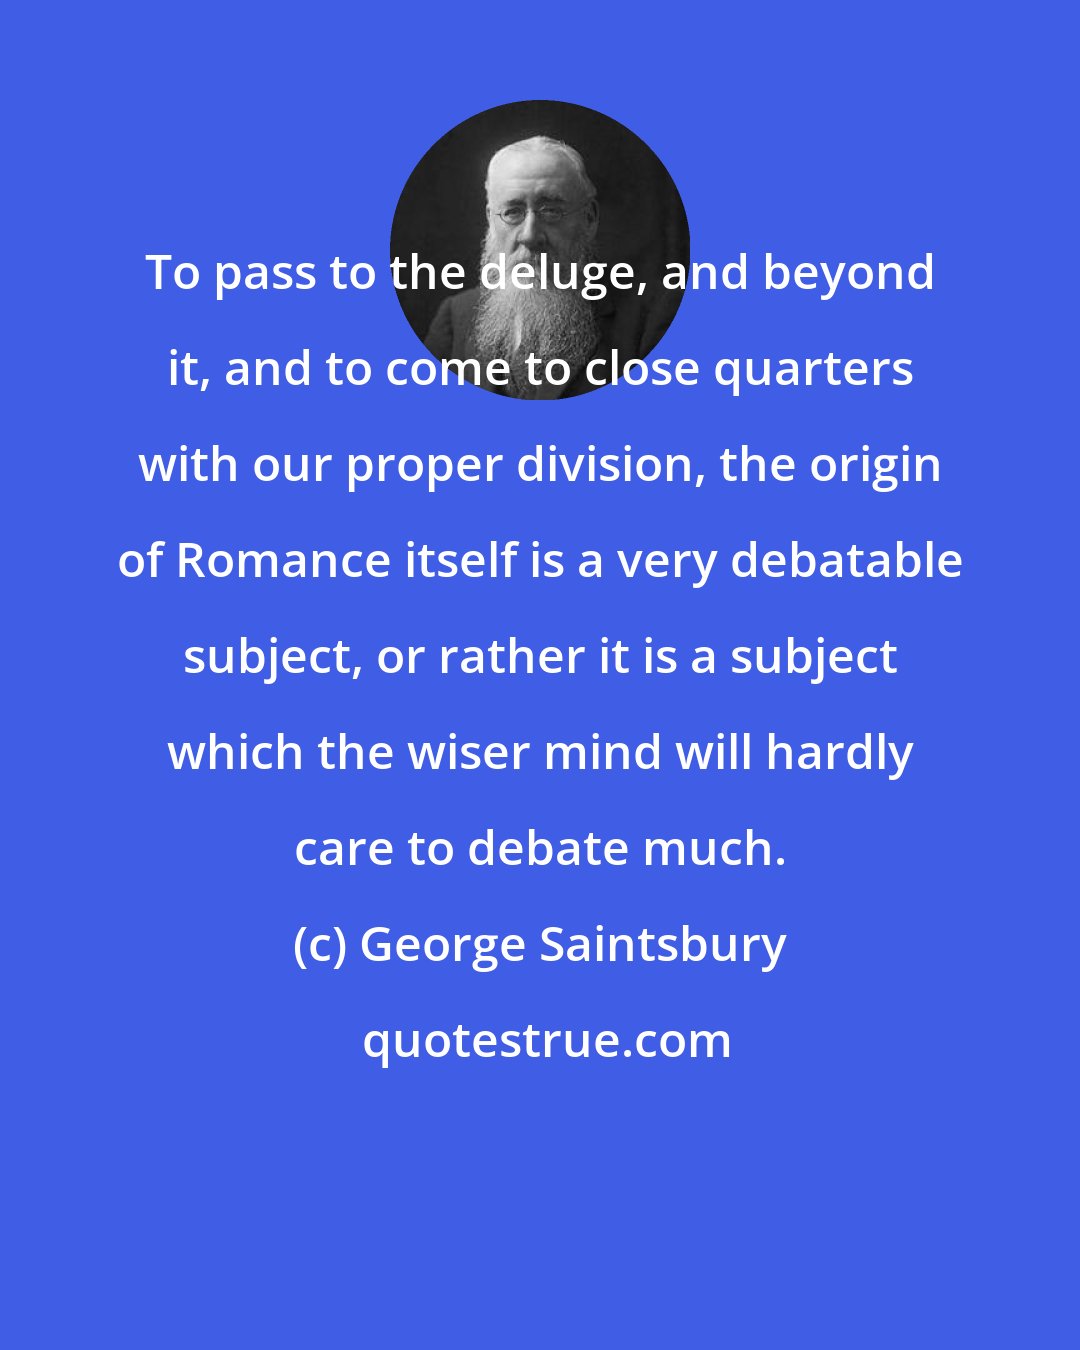 George Saintsbury: To pass to the deluge, and beyond it, and to come to close quarters with our proper division, the origin of Romance itself is a very debatable subject, or rather it is a subject which the wiser mind will hardly care to debate much.